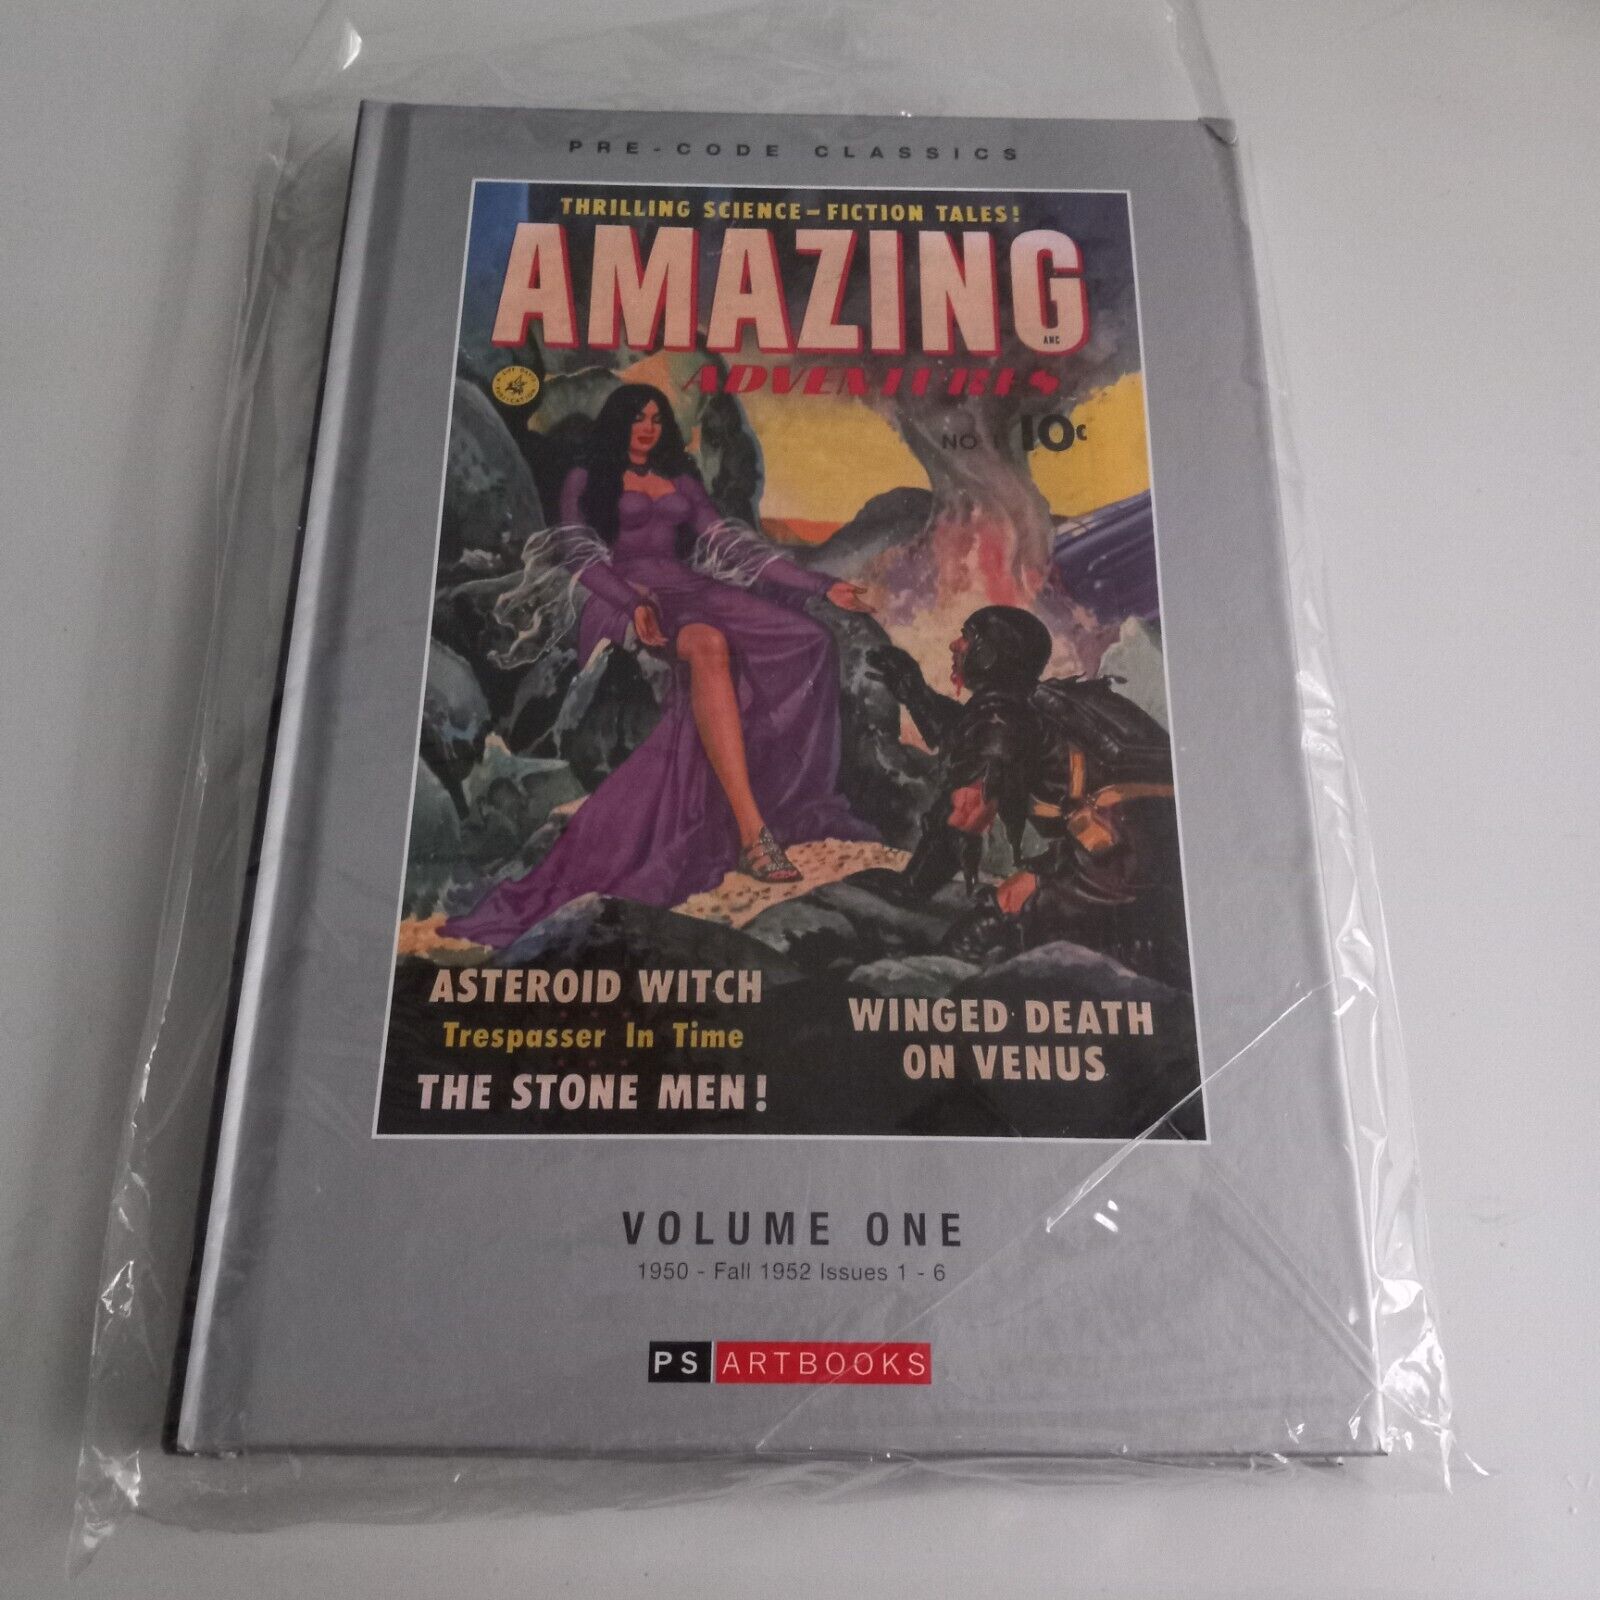 Amazing Adventures Vol 1 Hardcover Thrilling Science-fiction tales